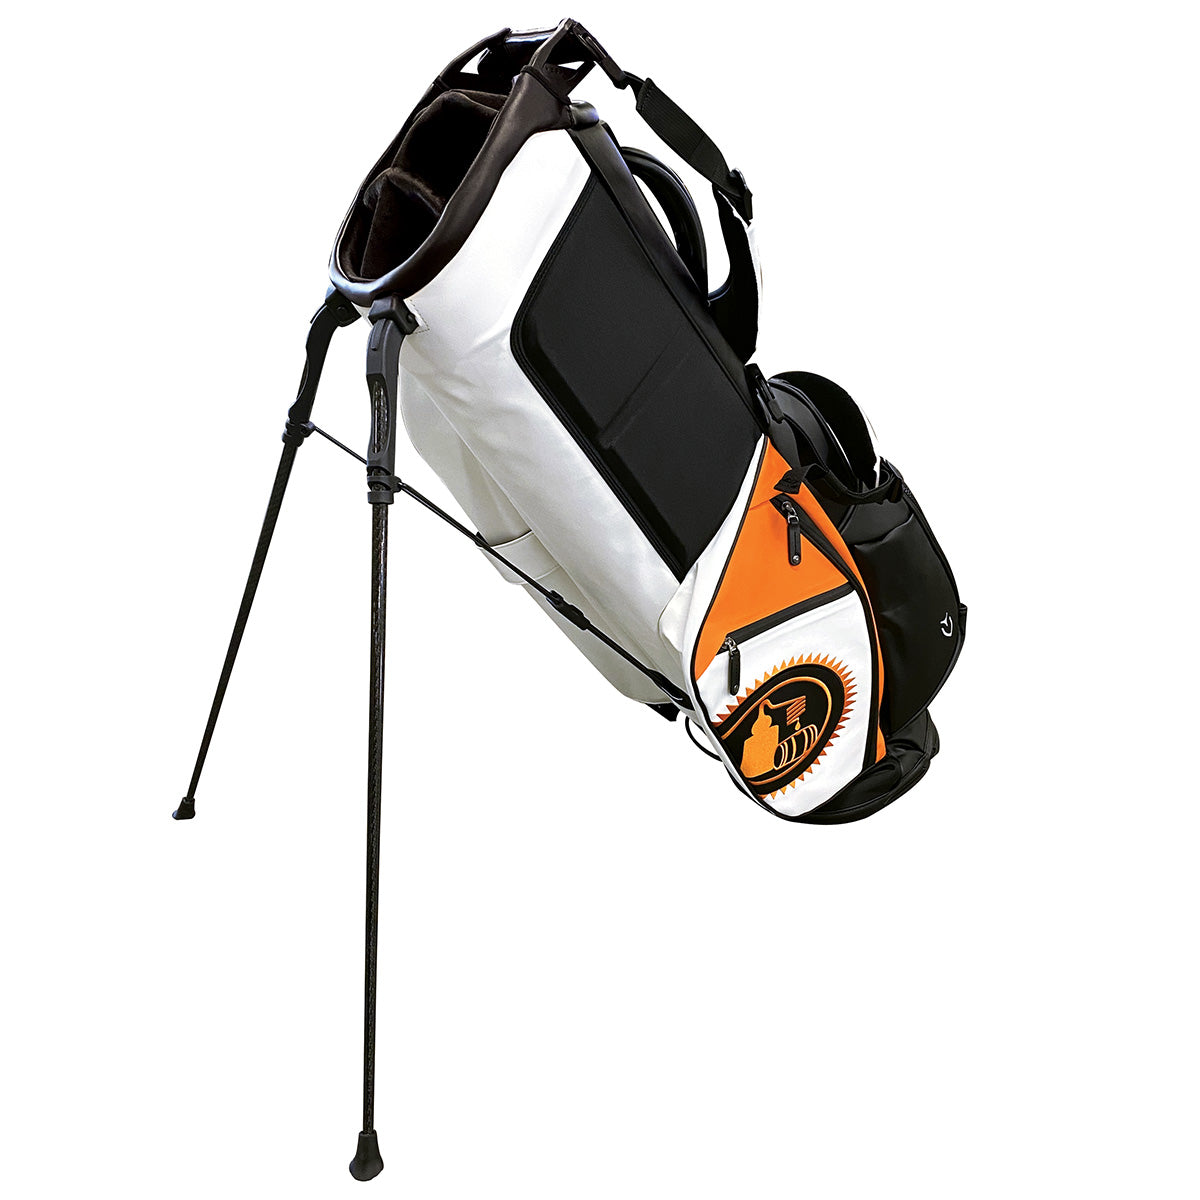 Golf Headz - The most expensive golf bag in the world.